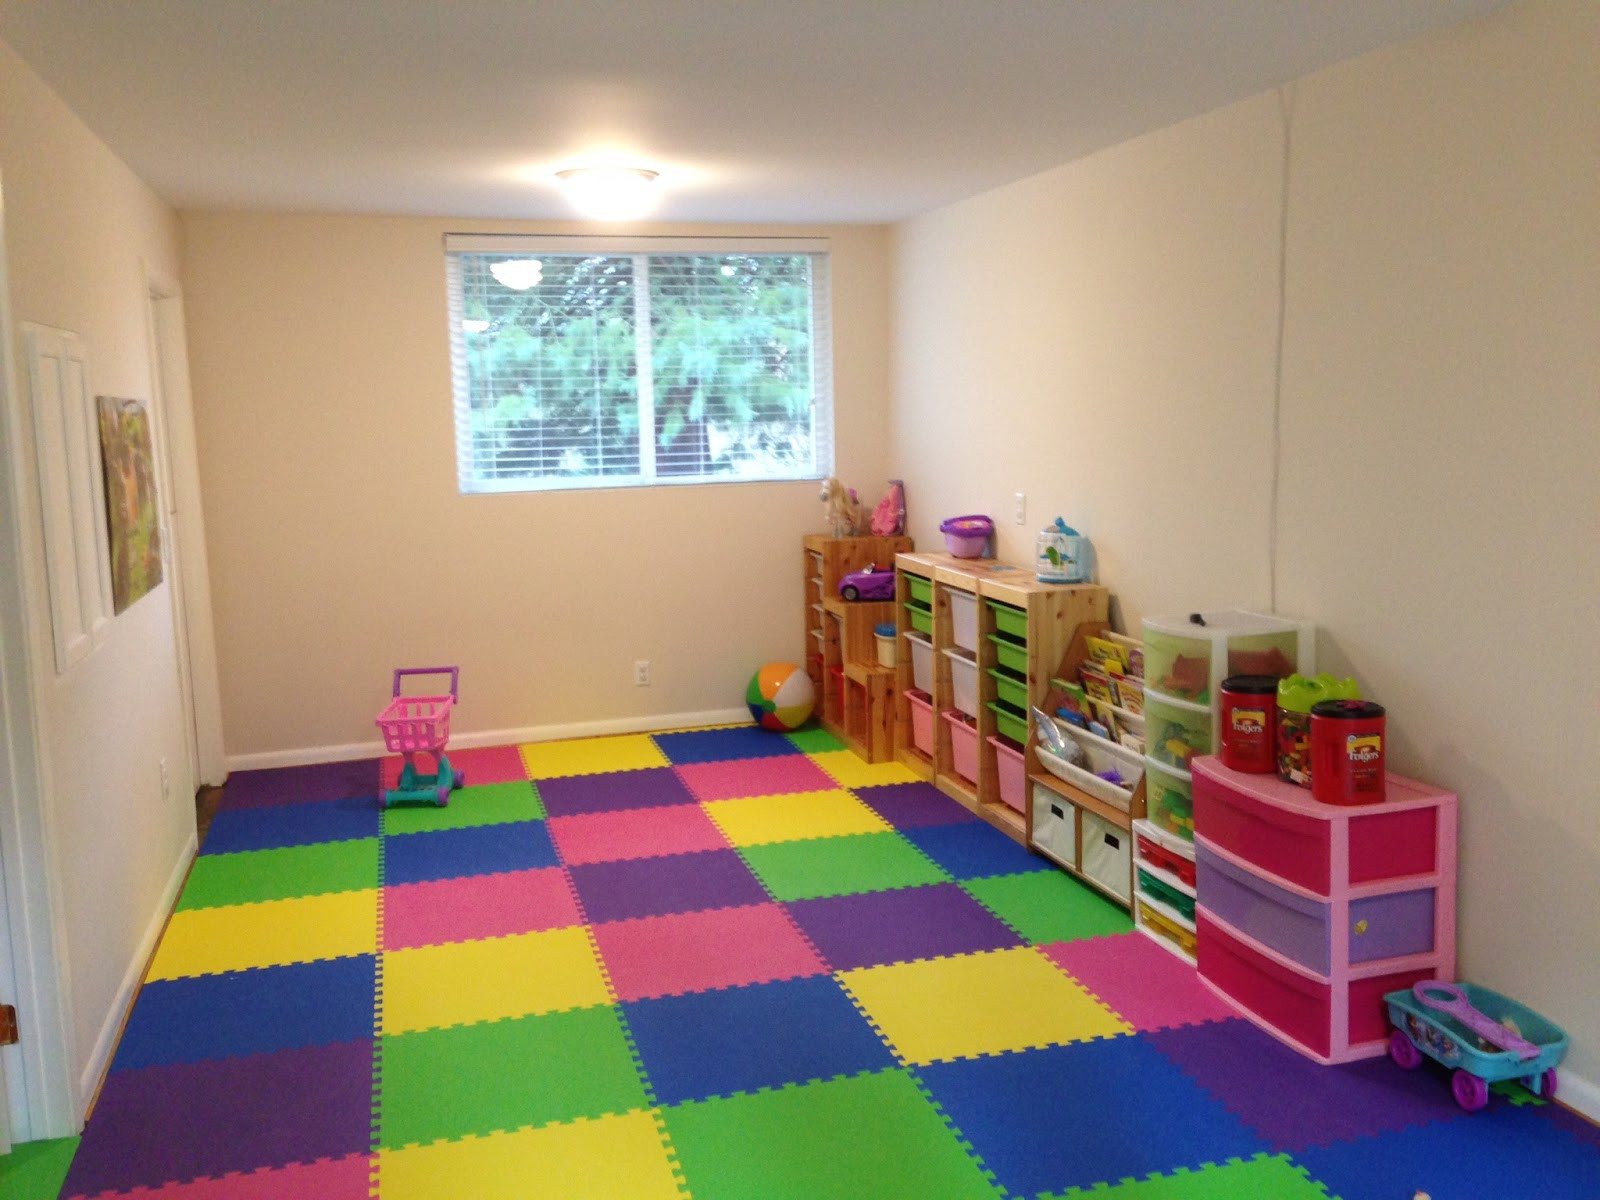 Floor For Kids Room
 Greatmats Specialty Flooring Mats and Tiles Creating a